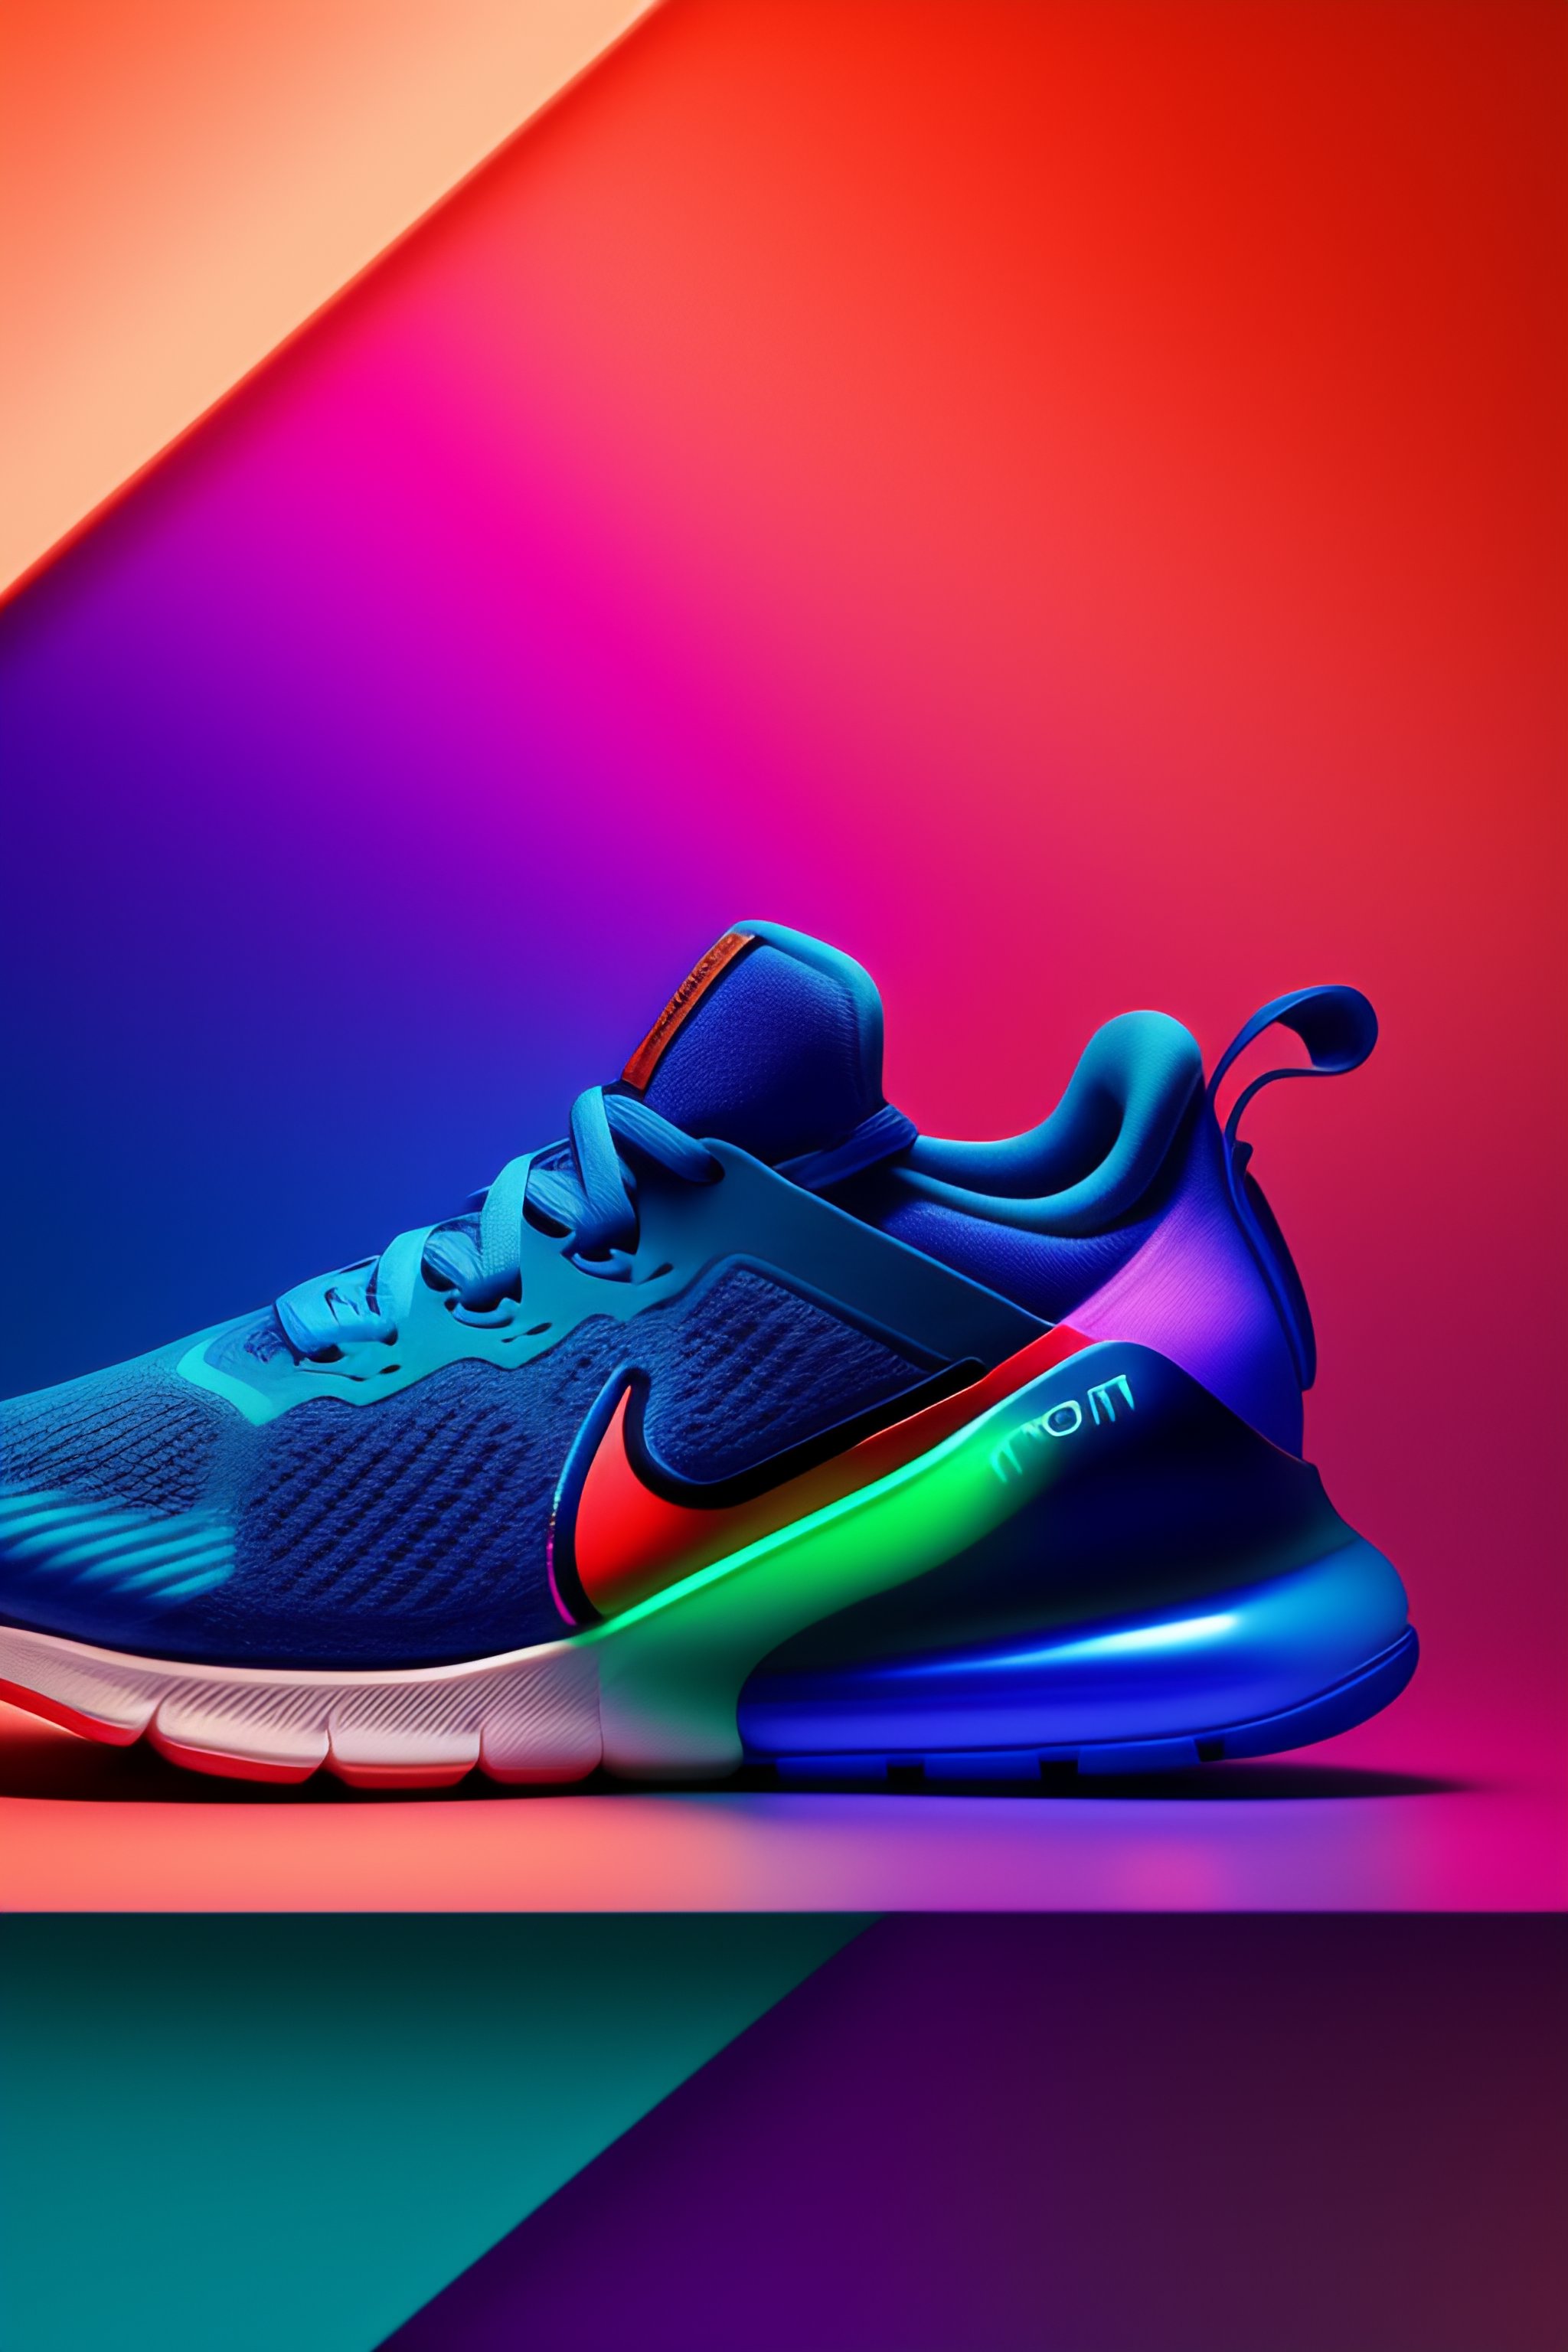 Lexica - Nike shoes website landing page, aesthetic website, eye catchy ...